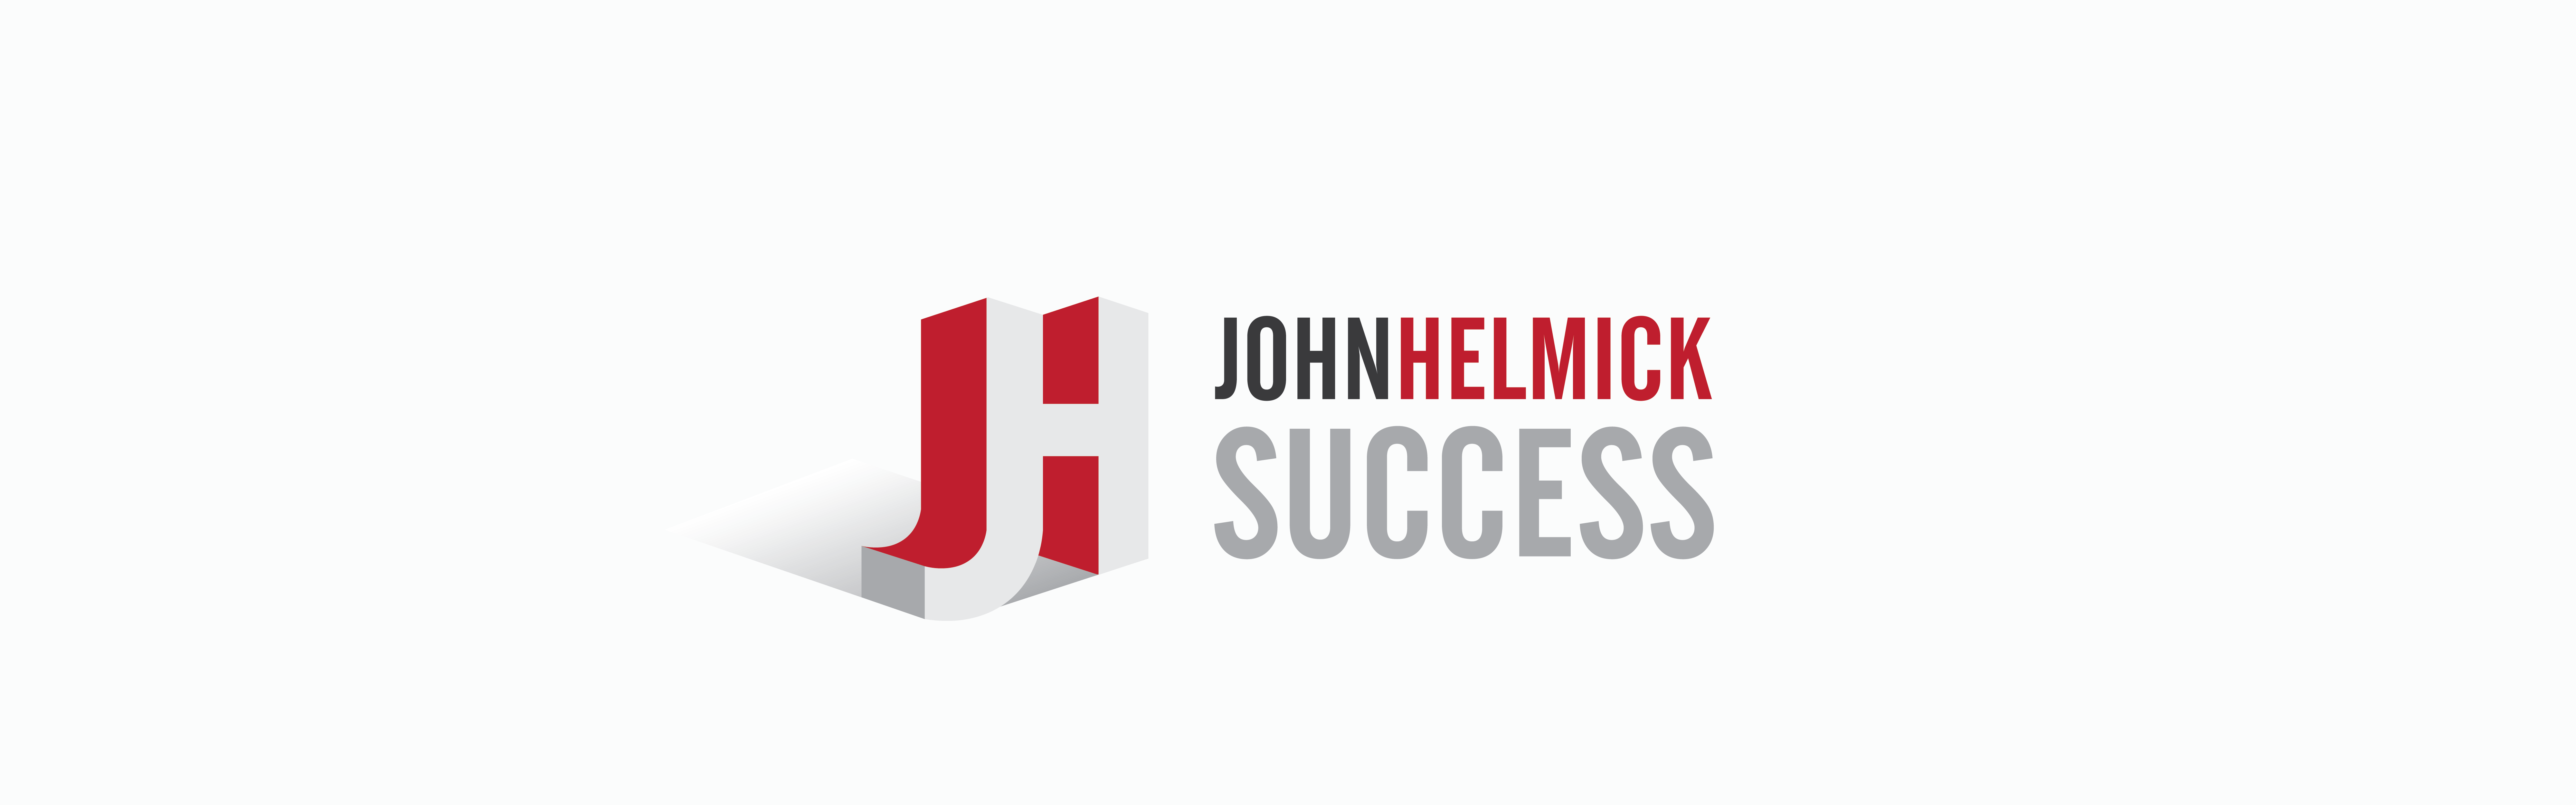 A logo with the initials "jh" in red, next to the text "John Helmick Success" in black lettering on a white background.